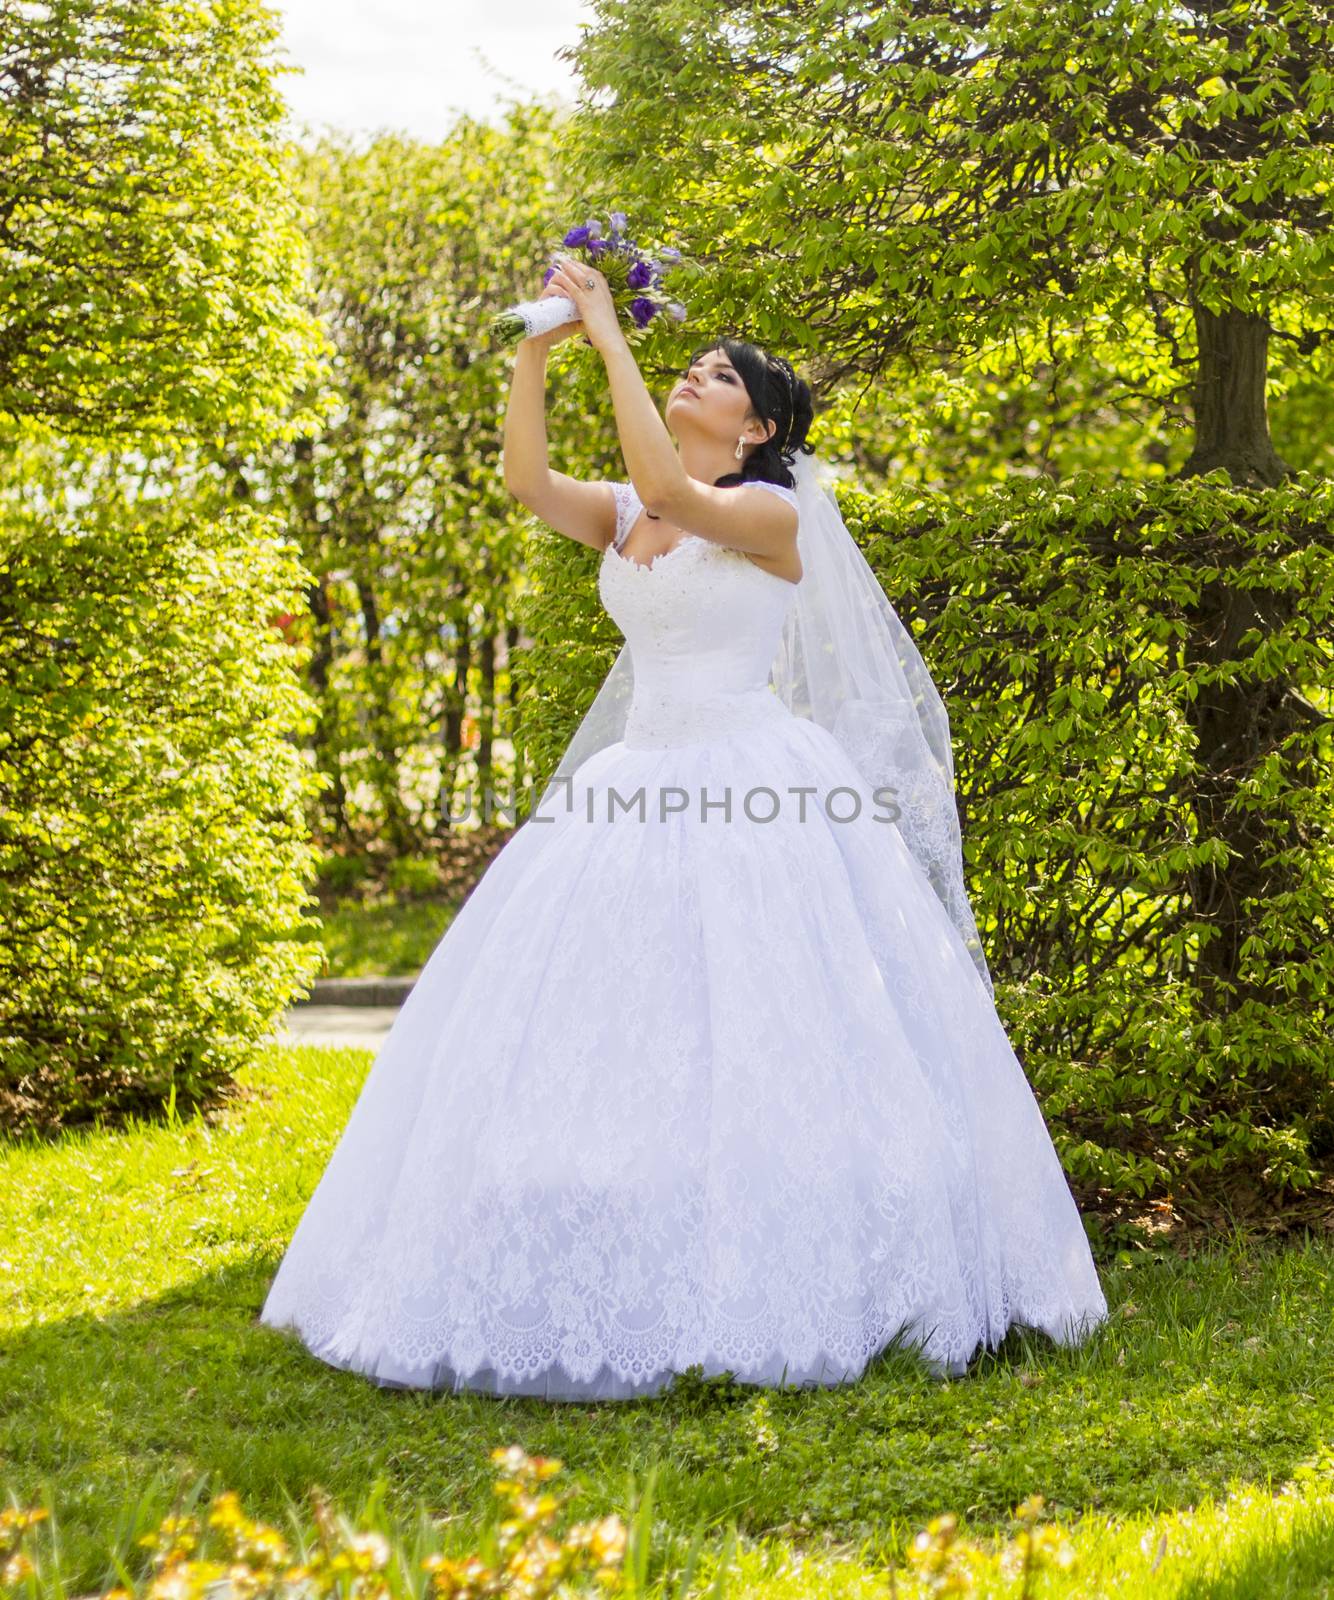 The bride with a bouquet. For your commercial and editorial use.